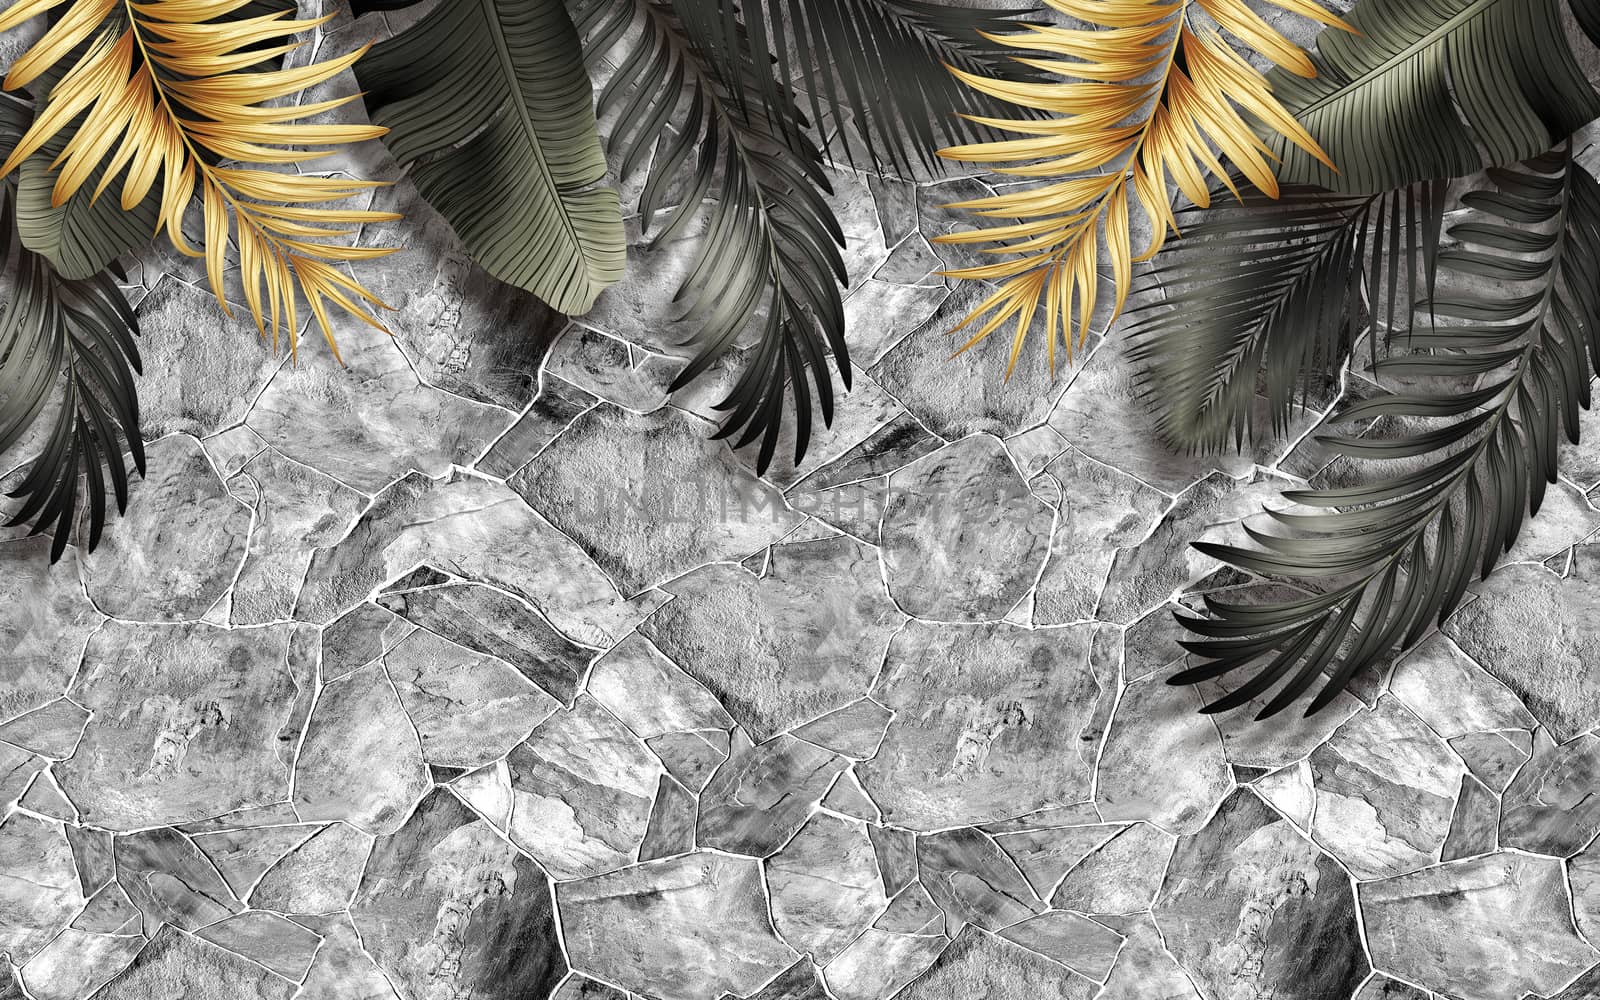 black and gold tropical leaves on dark background Luxury exotic  by ipinsadja